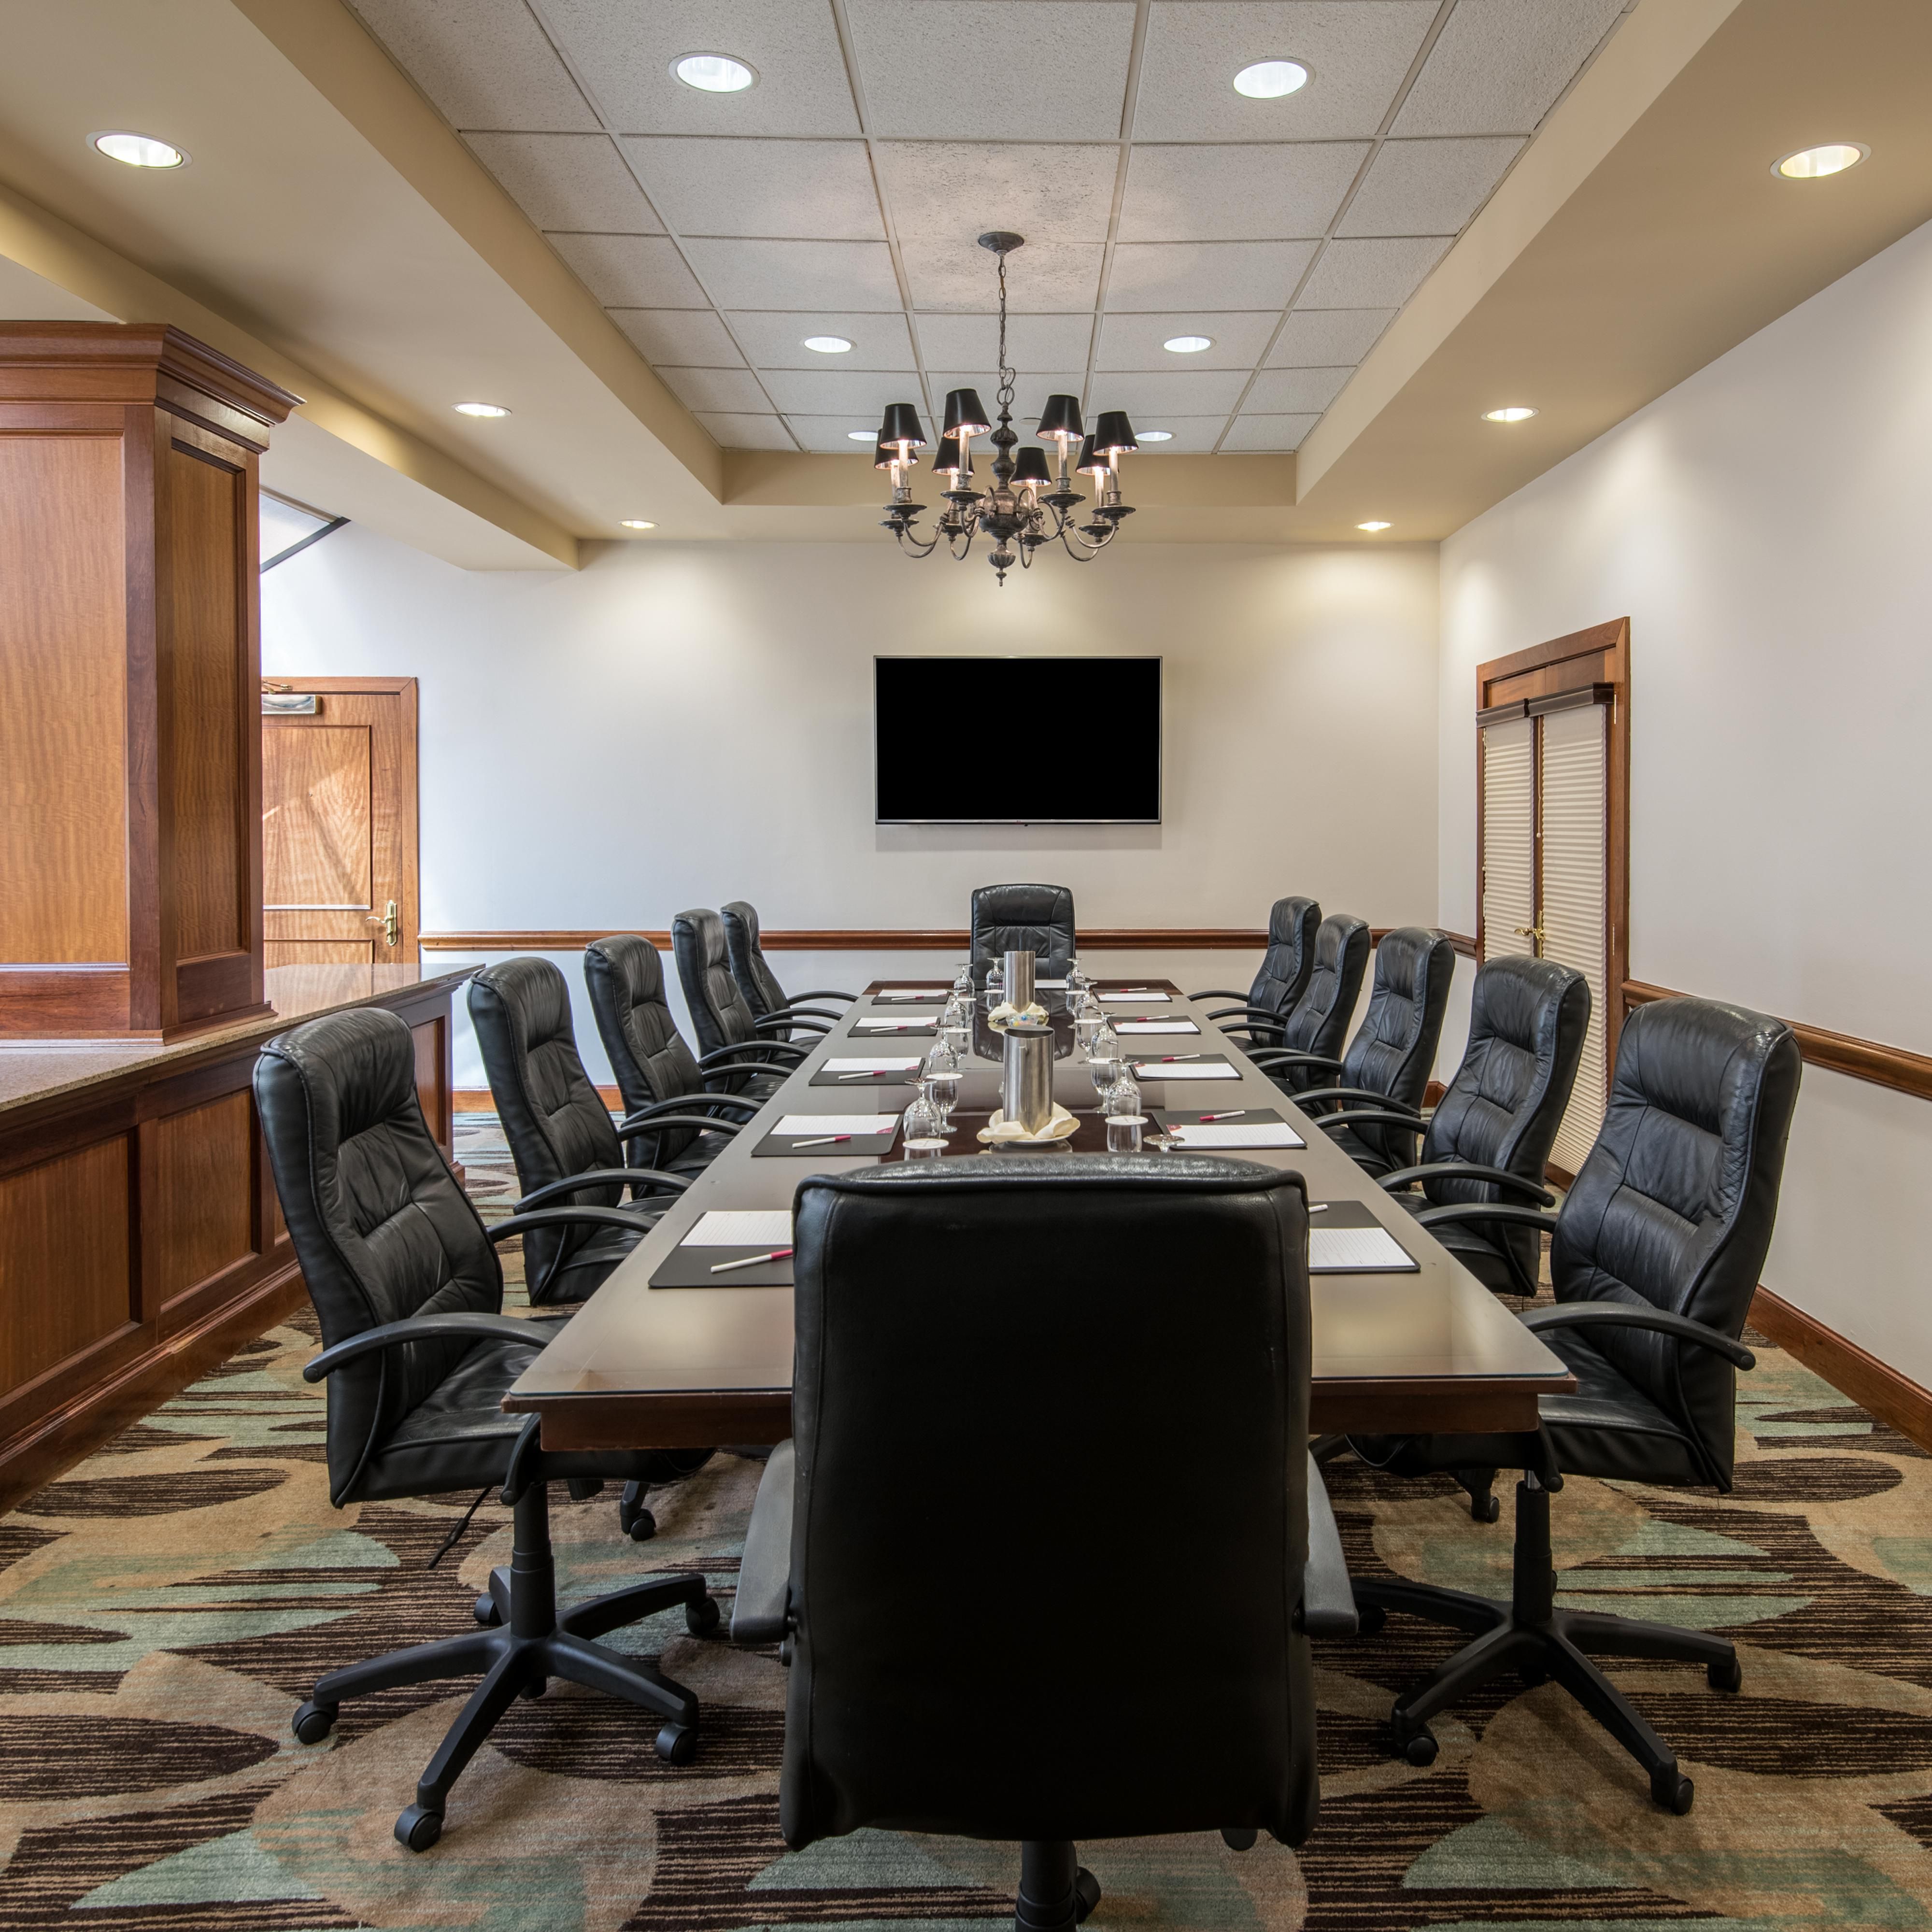 Have a board meeting? Try our Executive Boardroom 1.